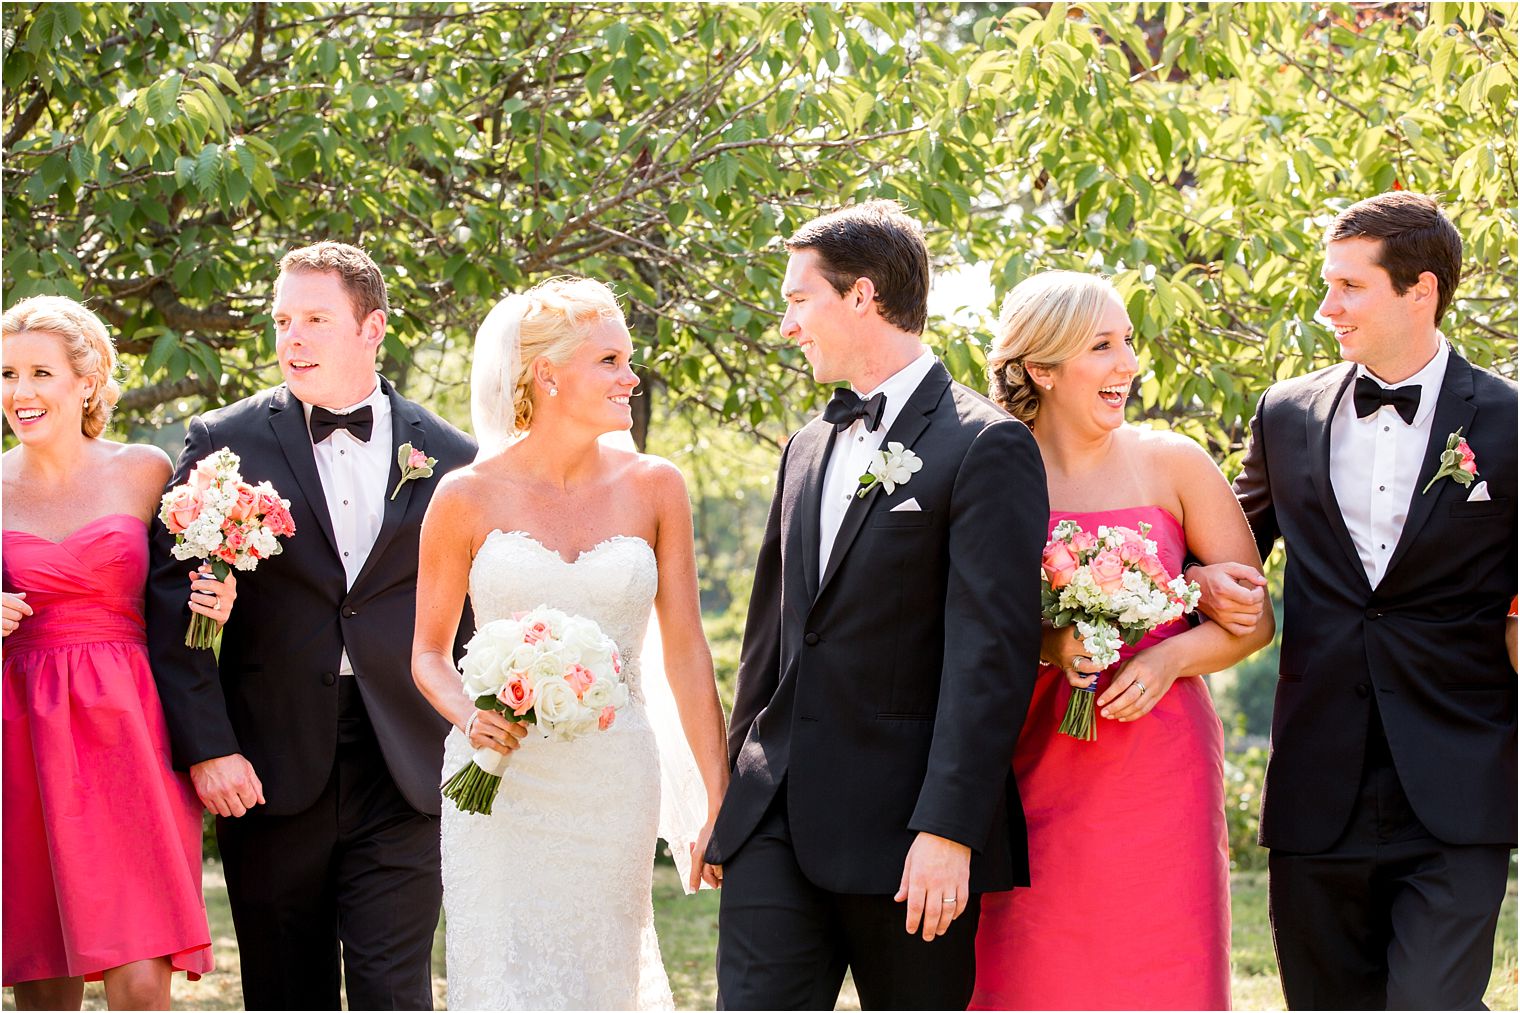 Coral and black tux wedding